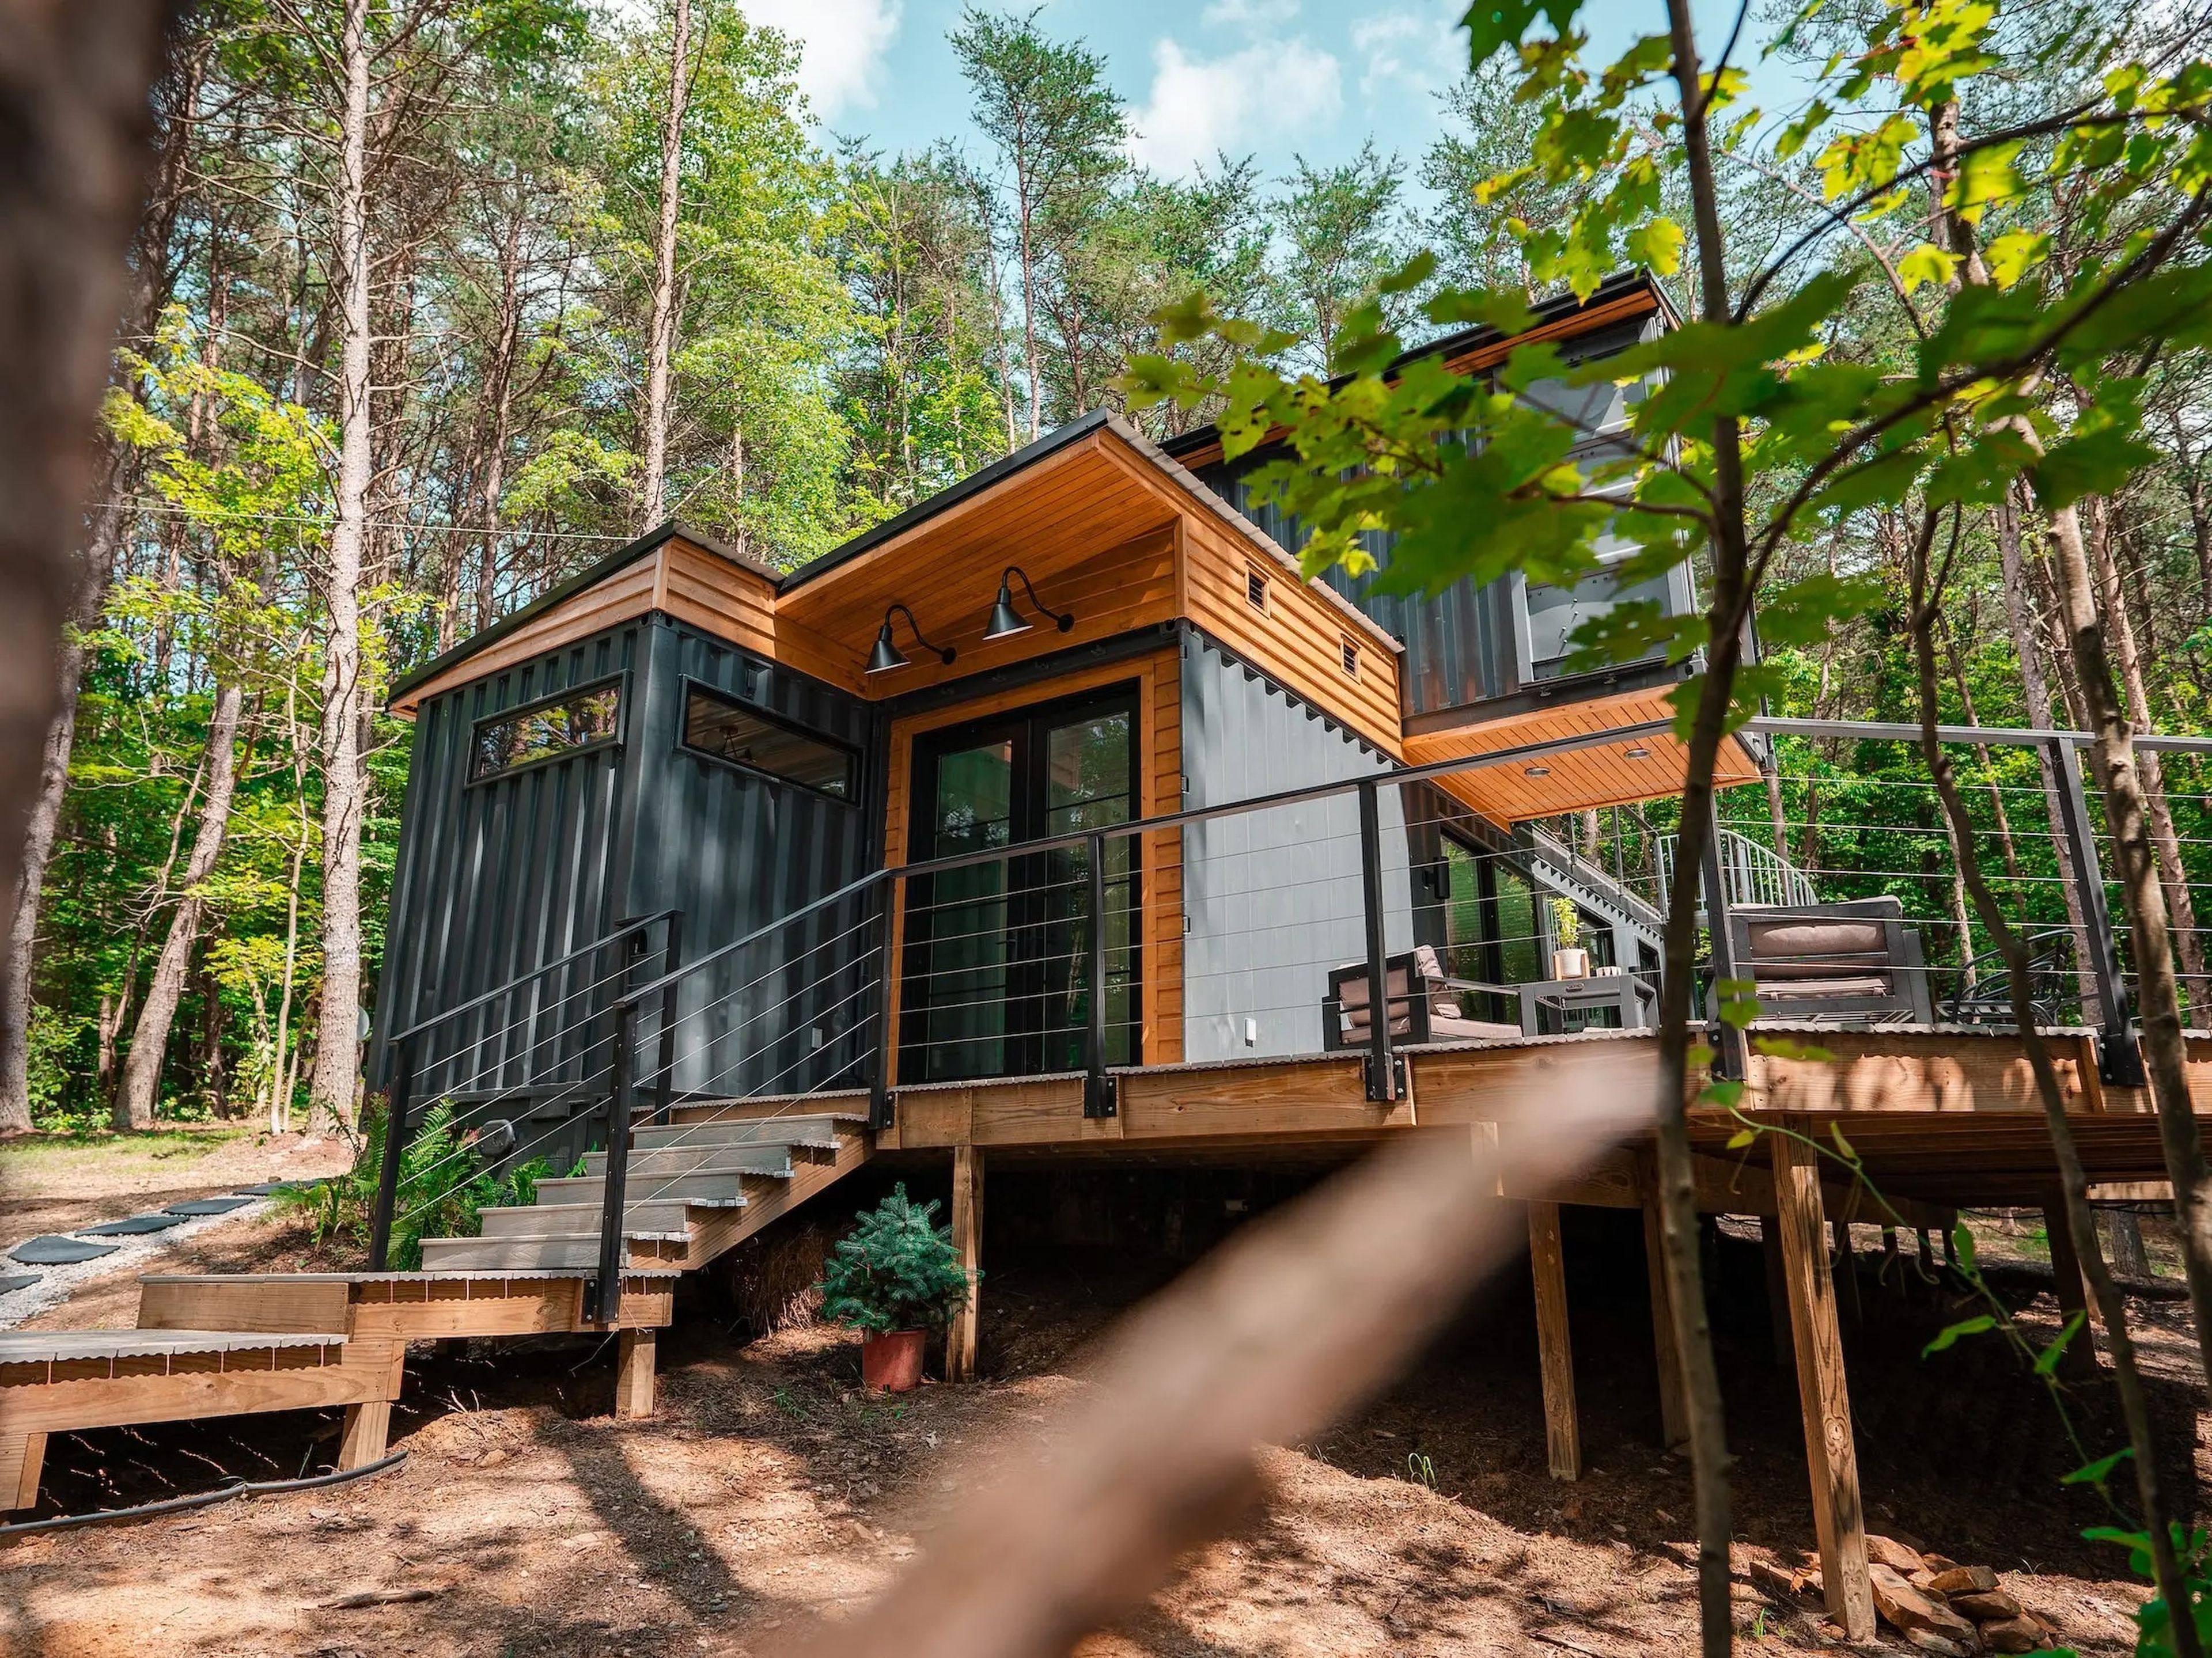 The OG Box, a shipping container home, surrounded by trees on a bright day.